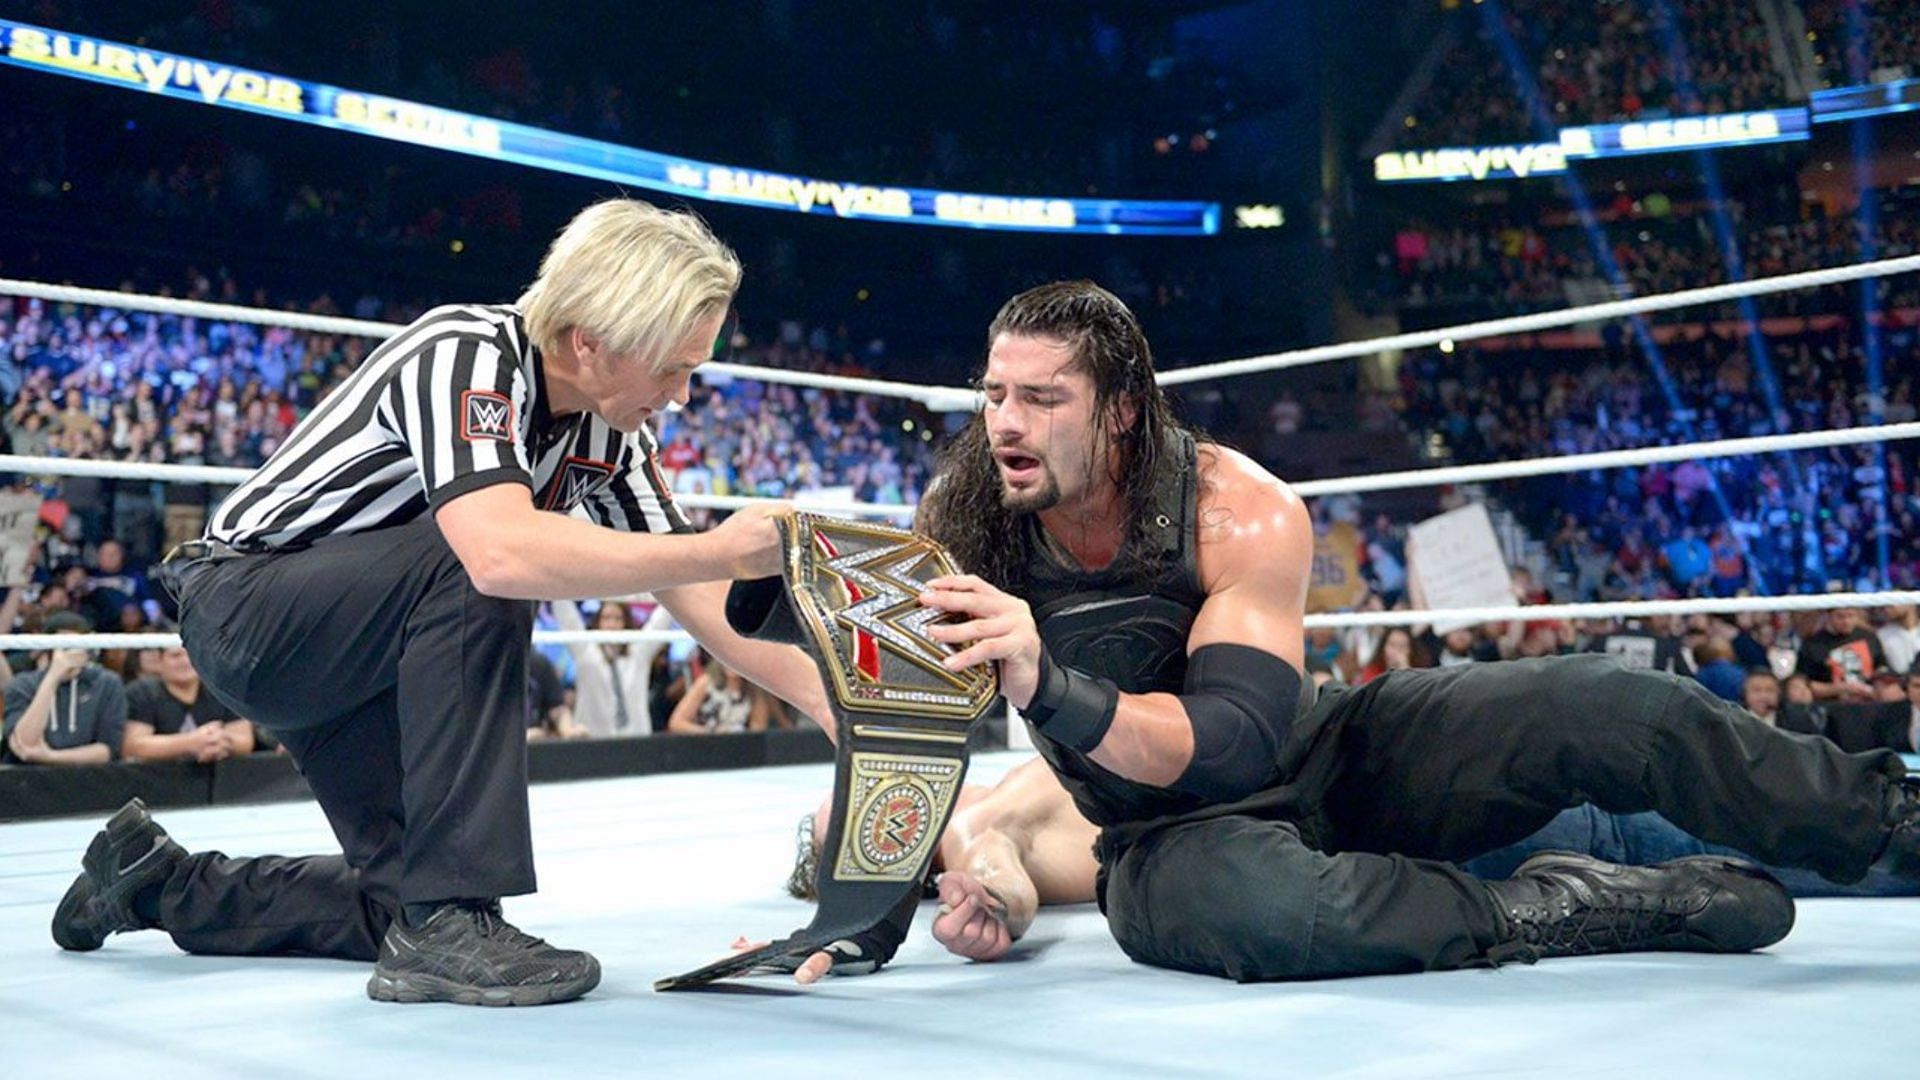 The Big Dog won his first WWE title at Survivor Series 2015.